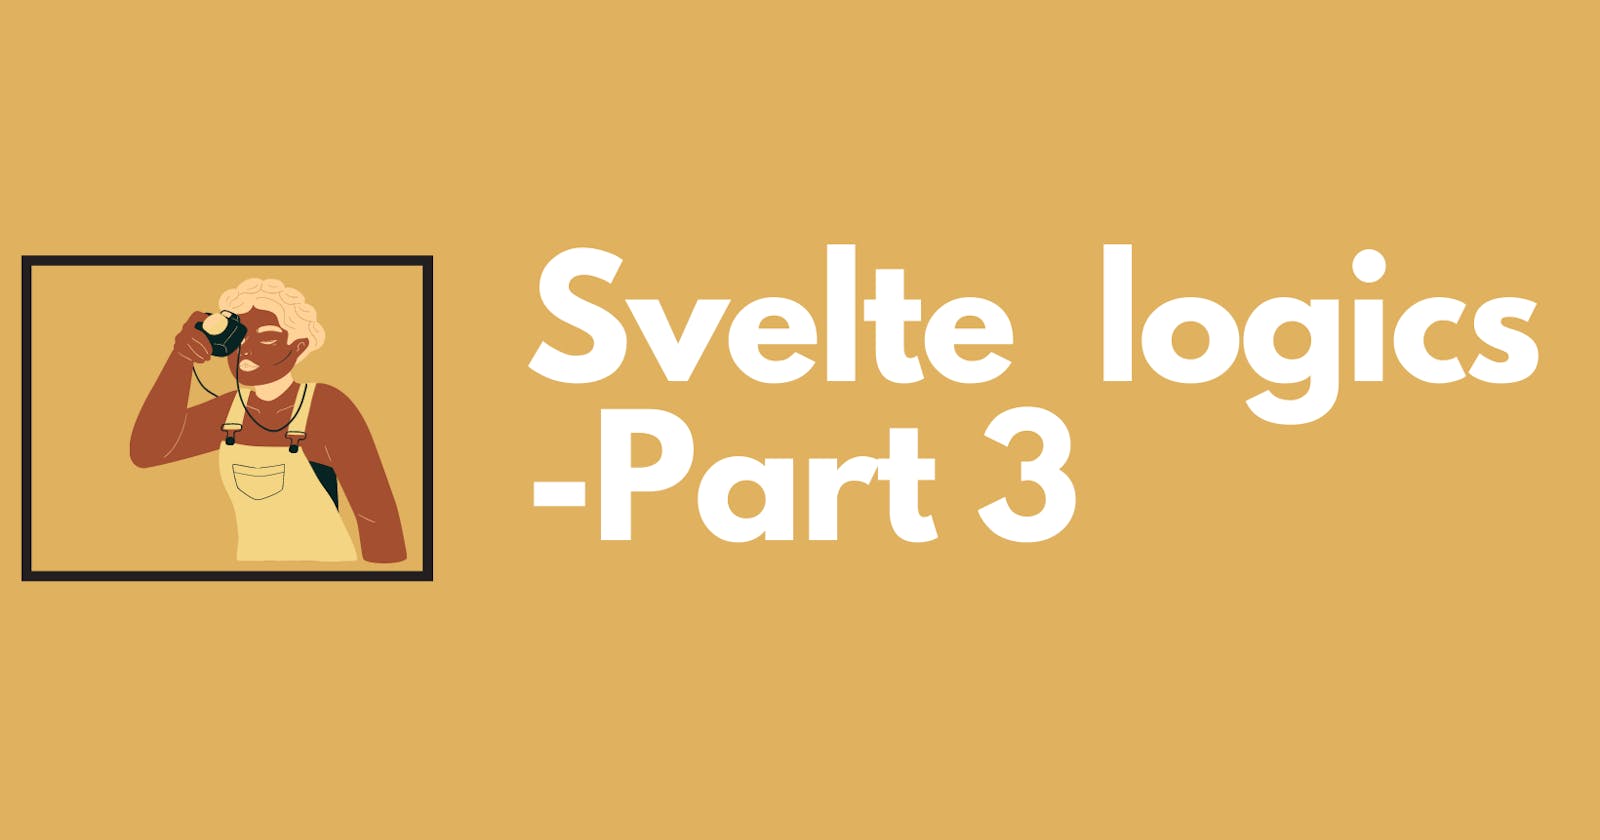 If-else and Loops in svelte